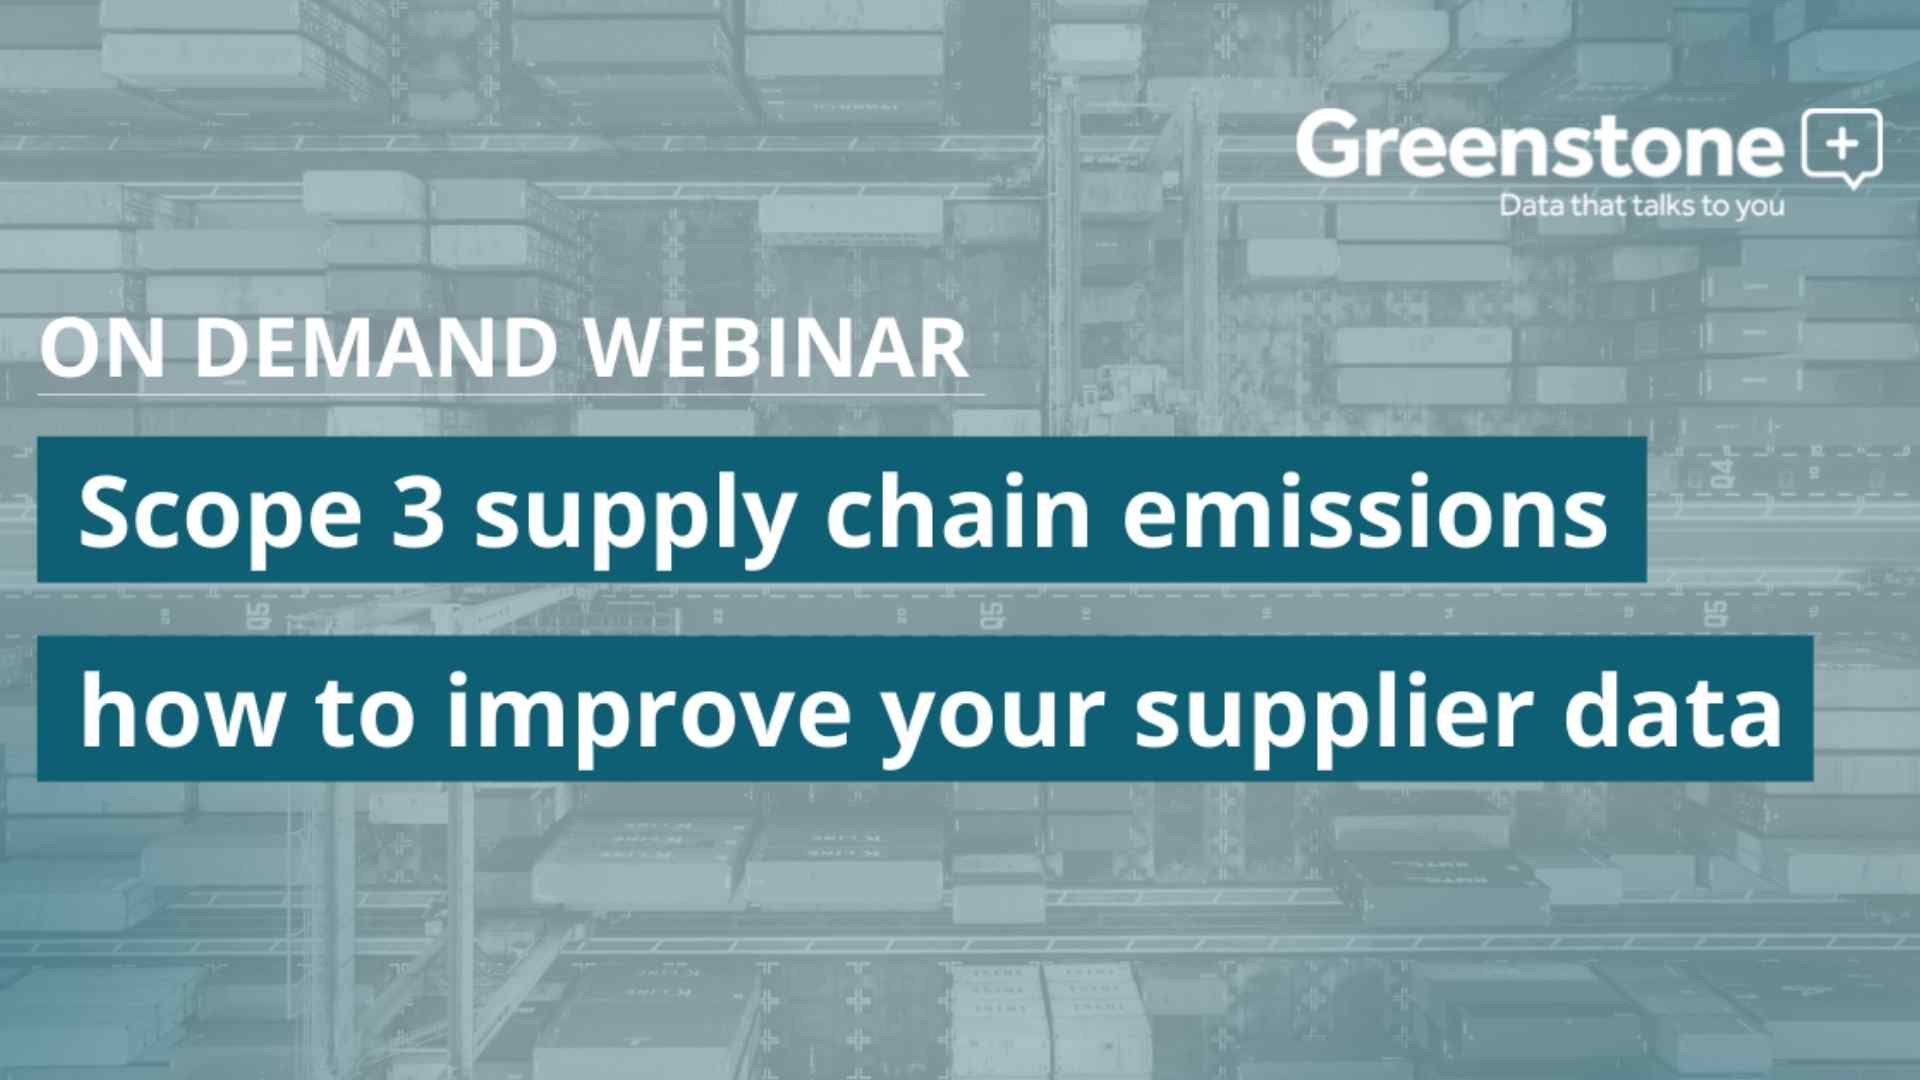 Scope 3 supply chain emissions - how to improve your supplier data